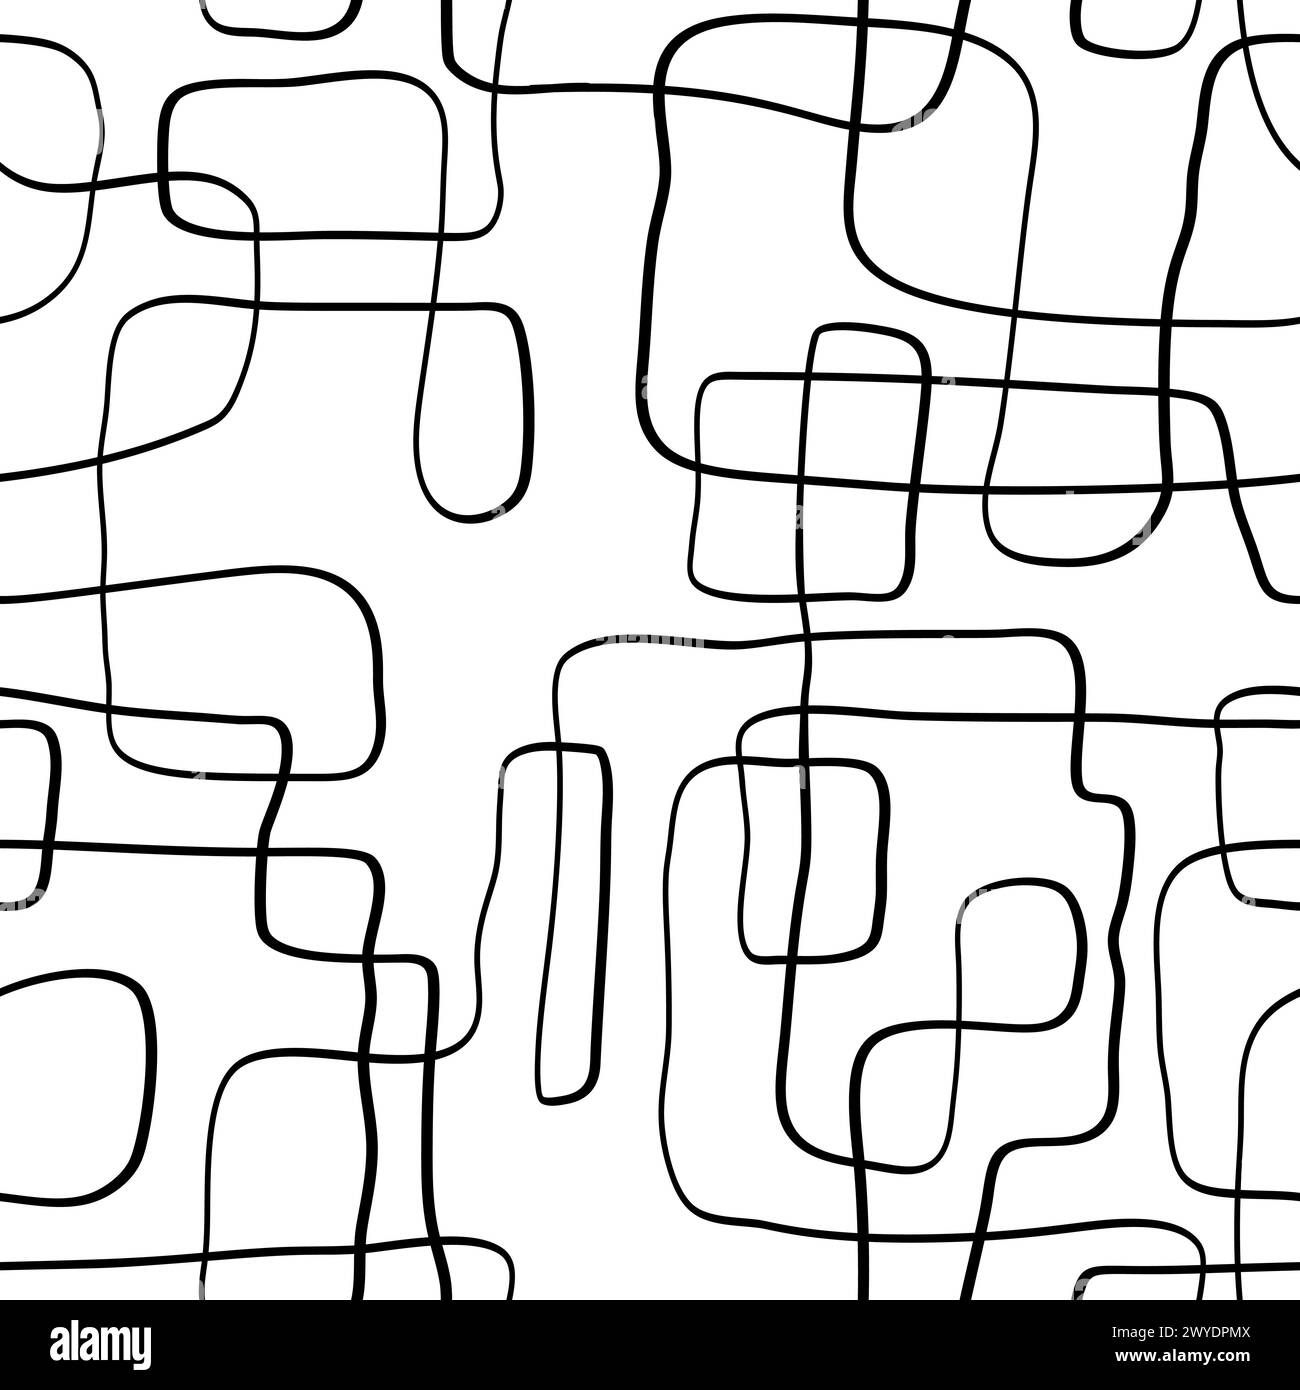 Abstract hand-drawn doodle seamless pattern. Clean and minimalist look. Stock Vector